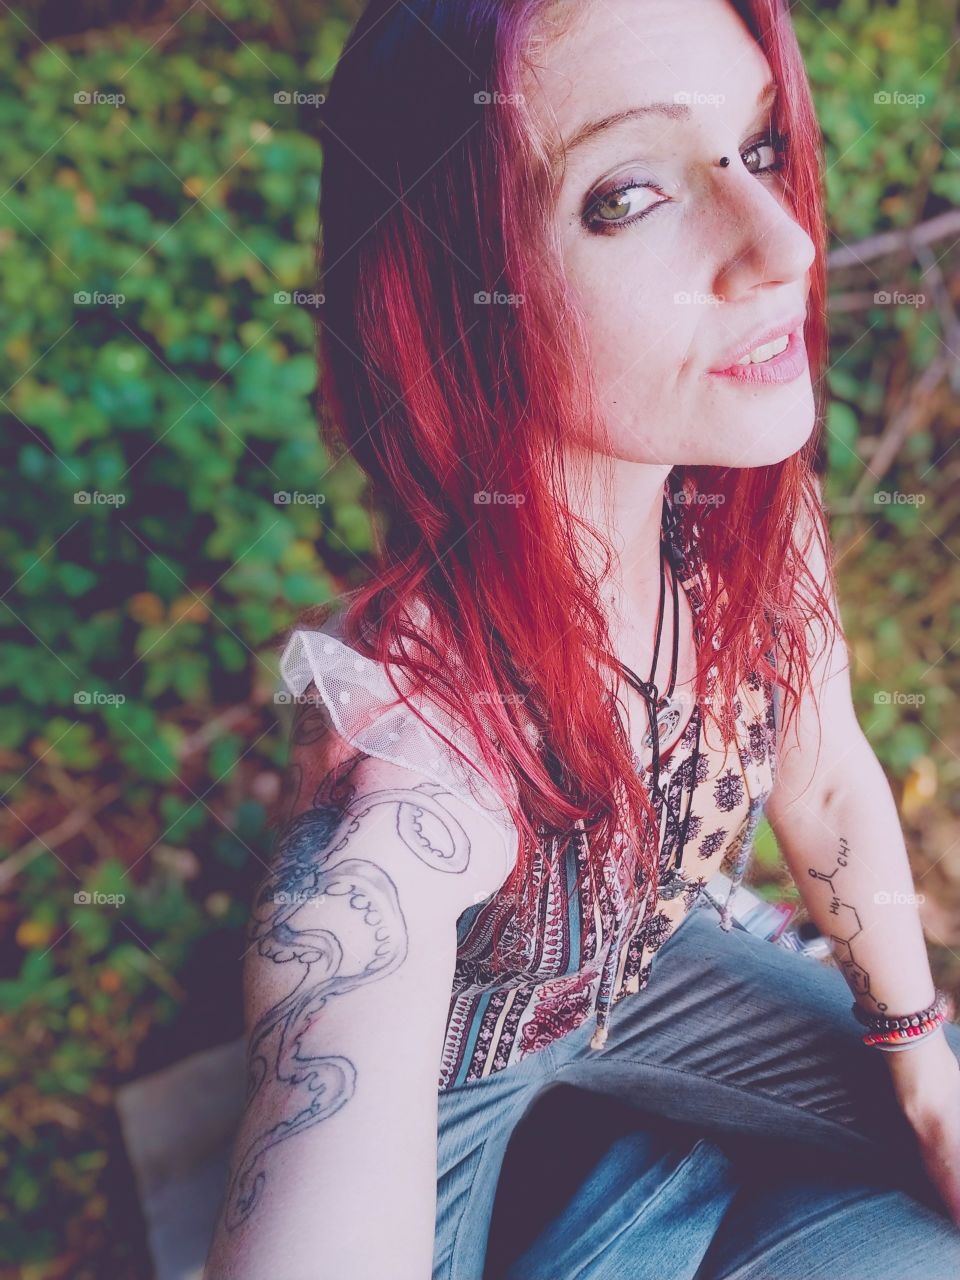 Woman sitting in her garden loving her environment, hippie Sunrise with vibrant hair.